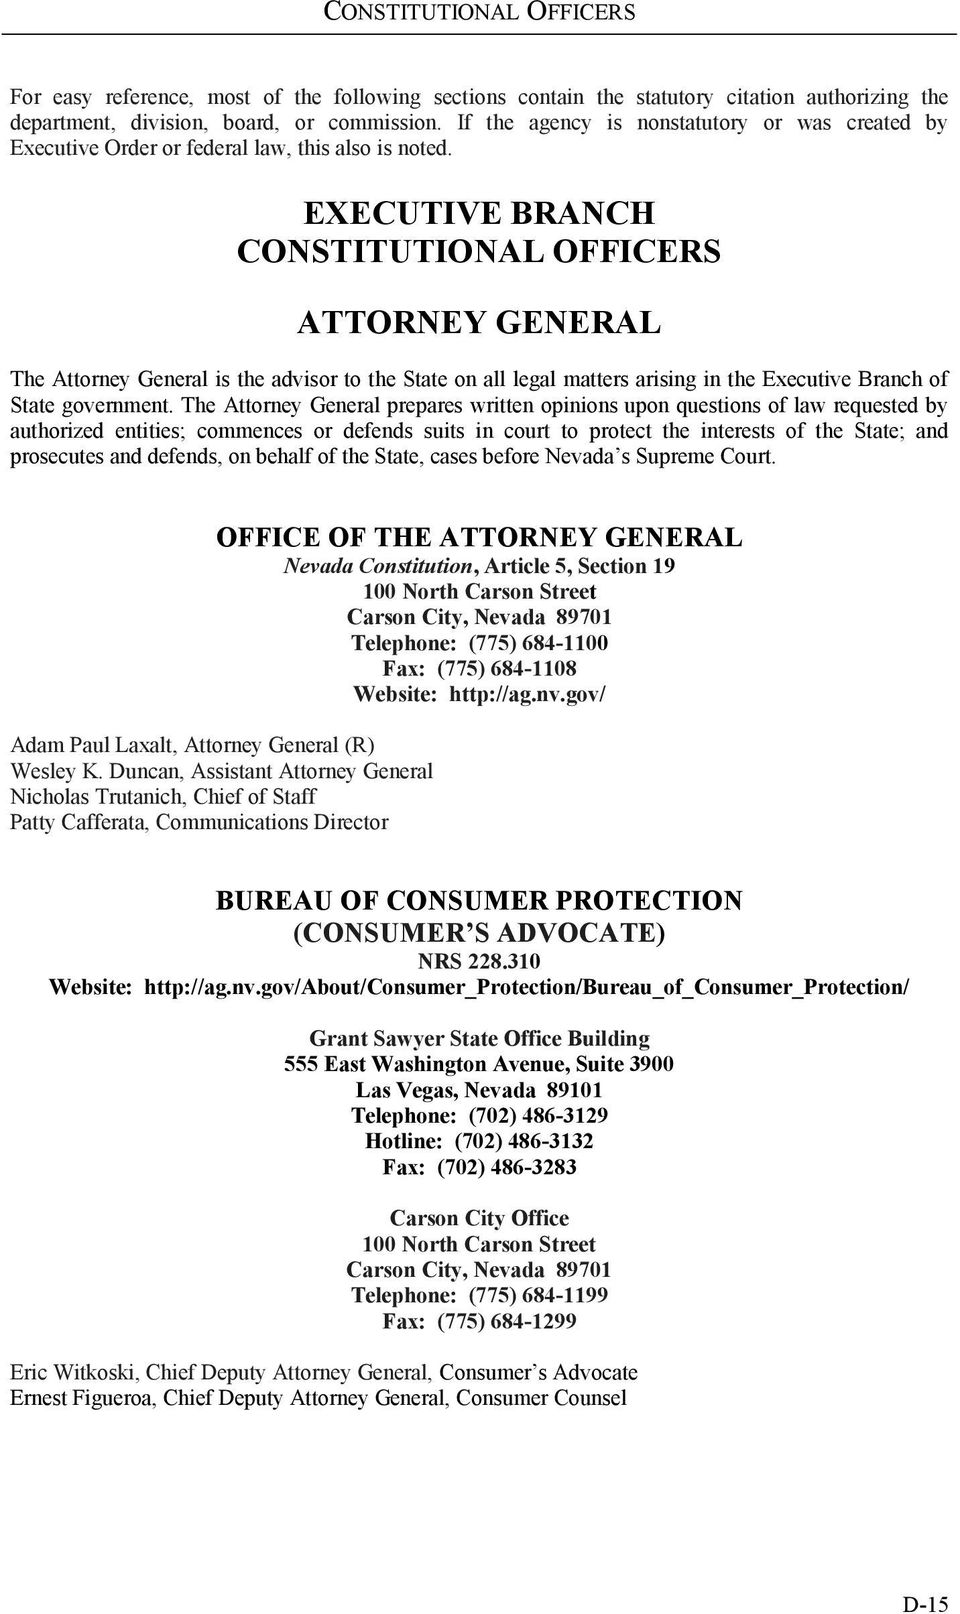 EXECUTIVE BRANCH CONSTITUTIONAL OFFICERS ATTORNEY GENERAL The Attorney General is the advisor to the State on all legal matters arising in the Executive Branch of State government.